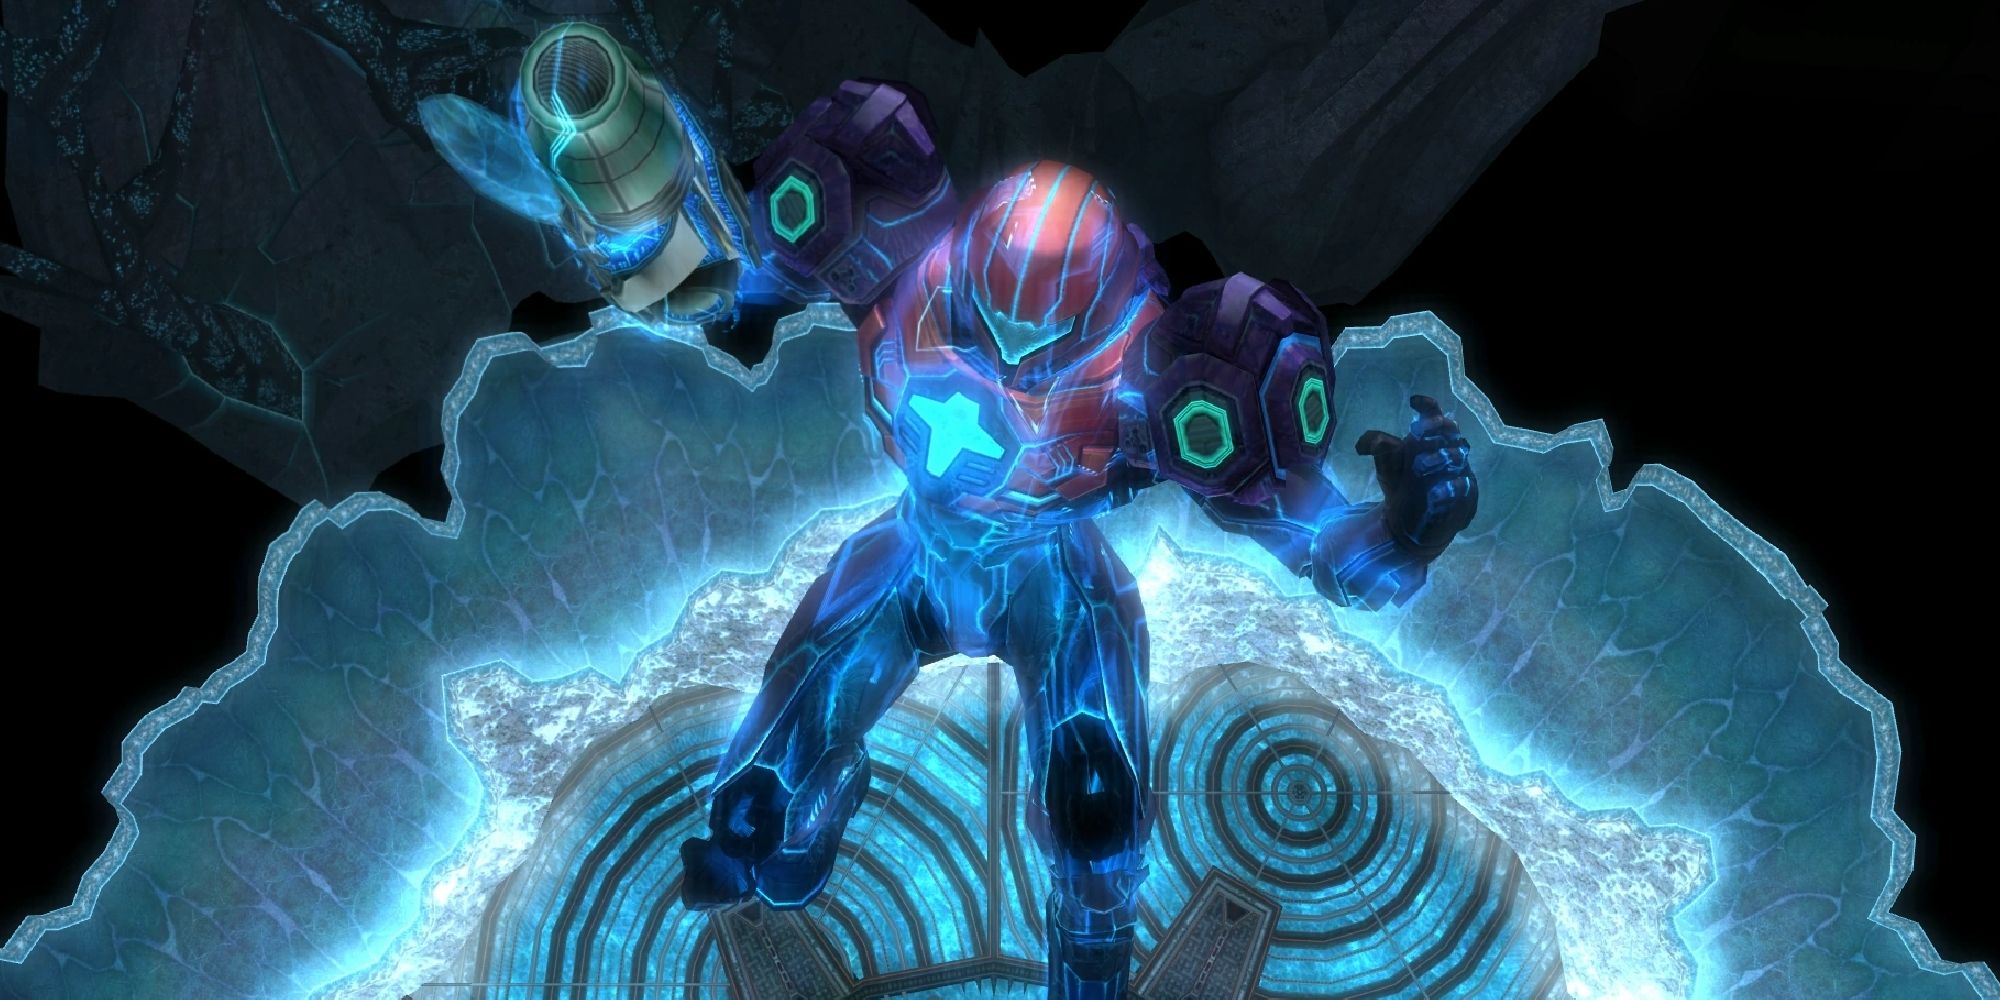 Samus being corrupted by Phazon on the planet Phaaze in Metroid Prime 3